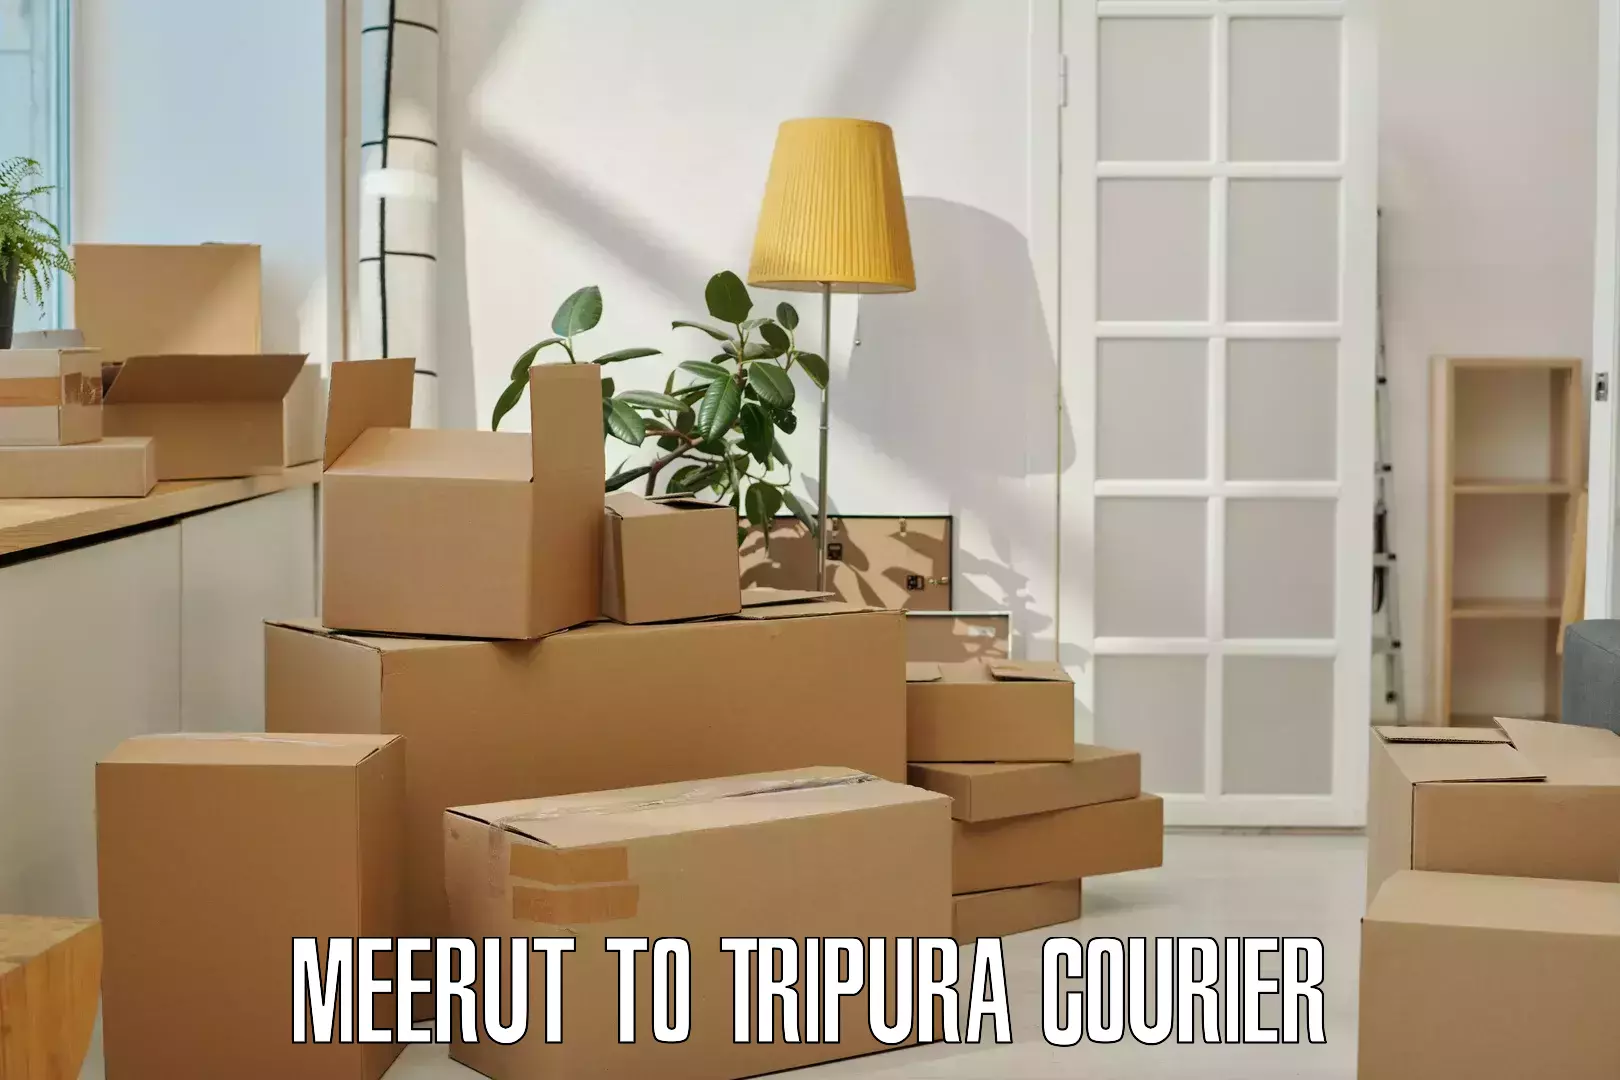 On-call courier service Meerut to Aambasa